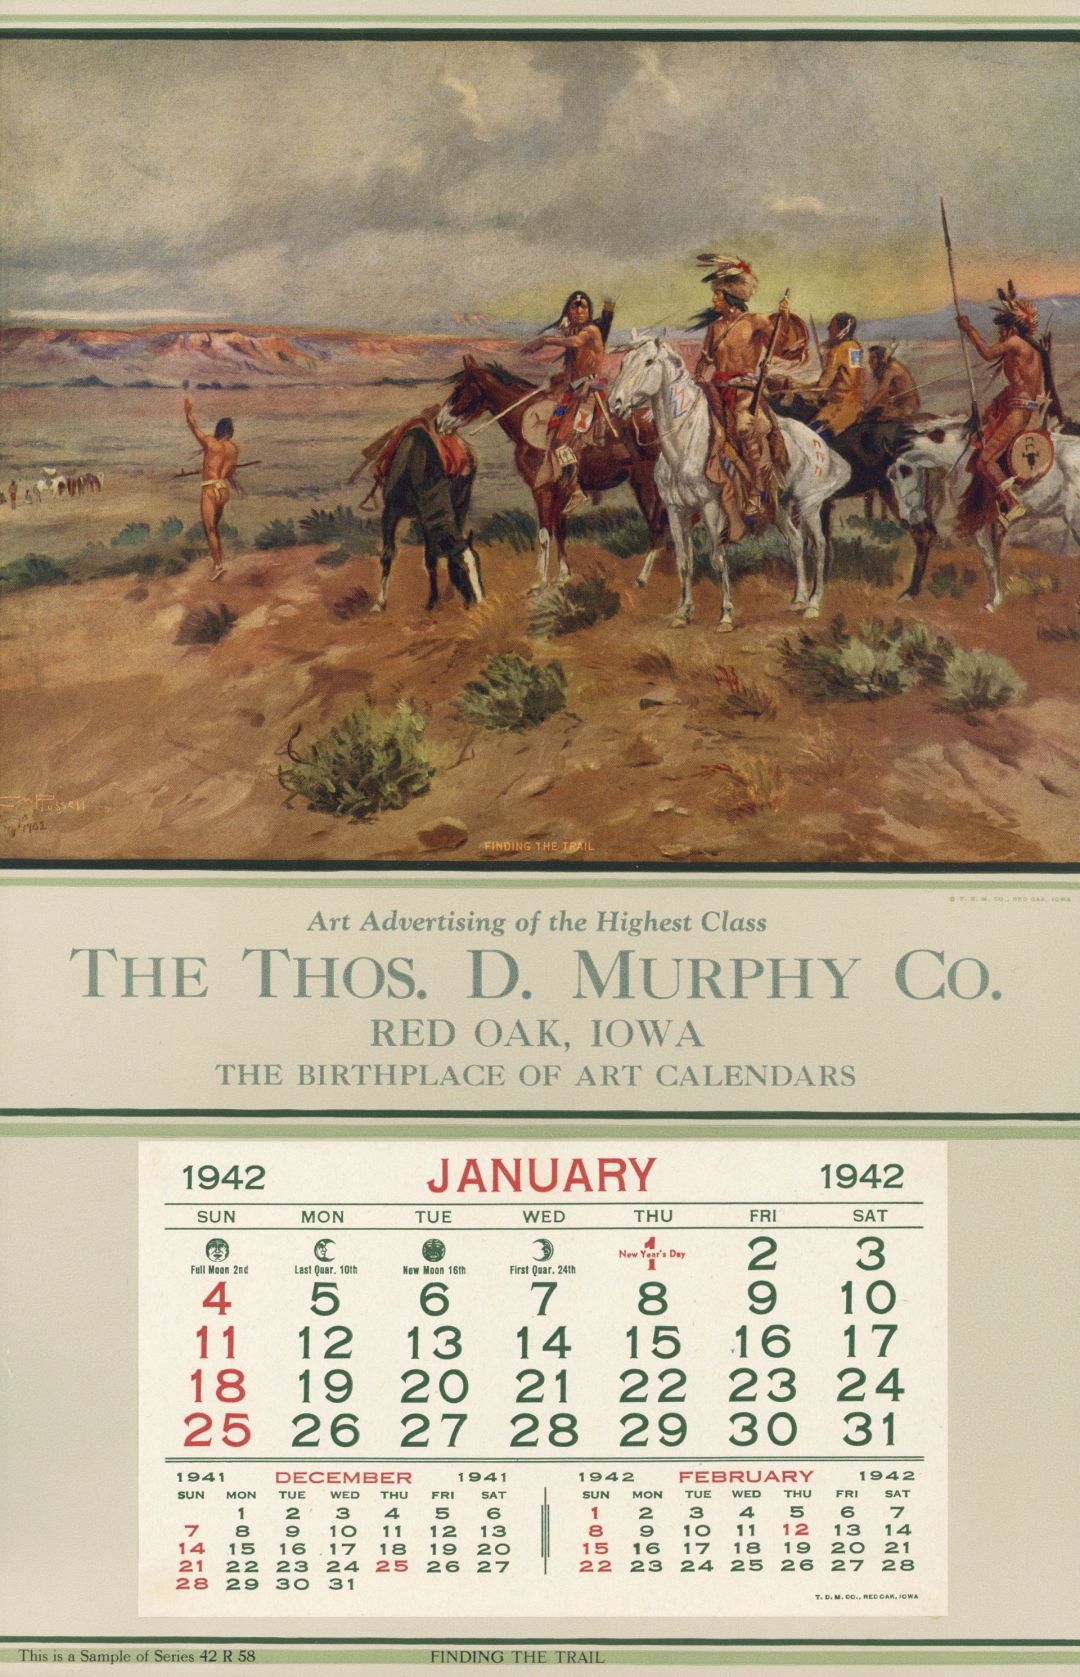 Salesman Sample Calendar - "Finding the Trail" by Charles M. Russell - Thos. D. Murphy Co.